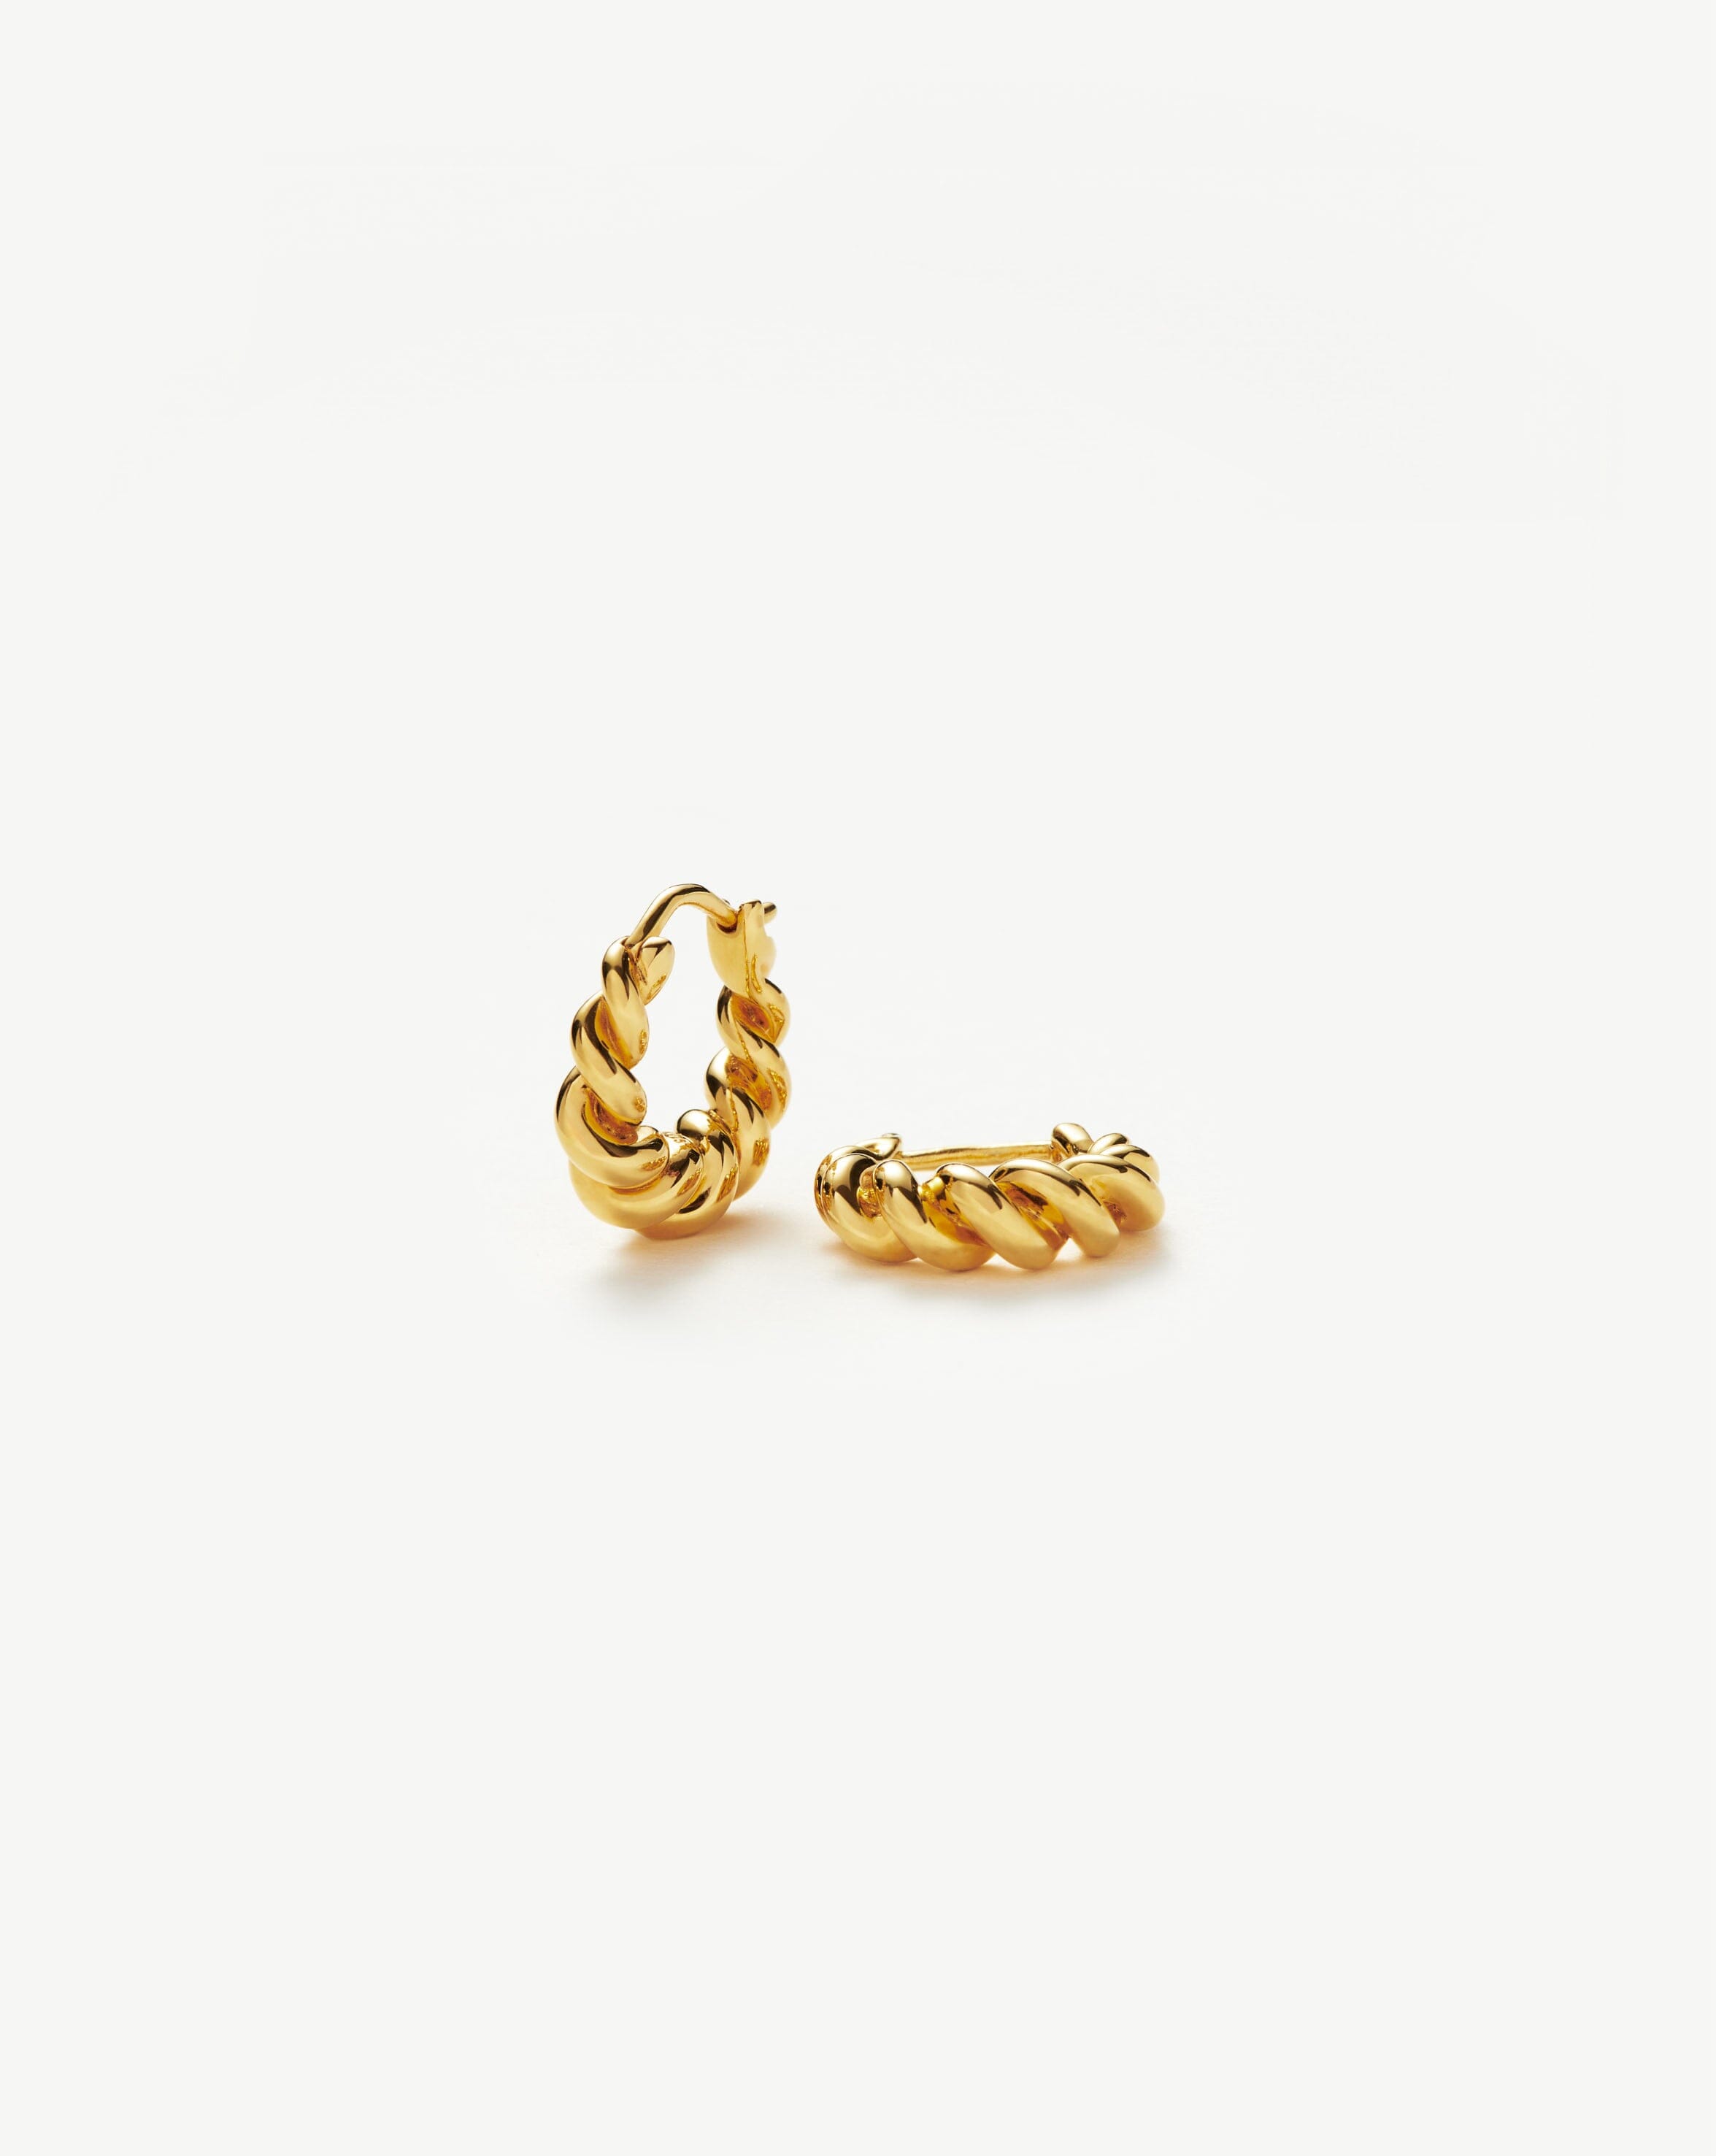 Missoma Tidal Ovate Hoop Earrings 18K Yellow Gold-Plated, 58% OFF